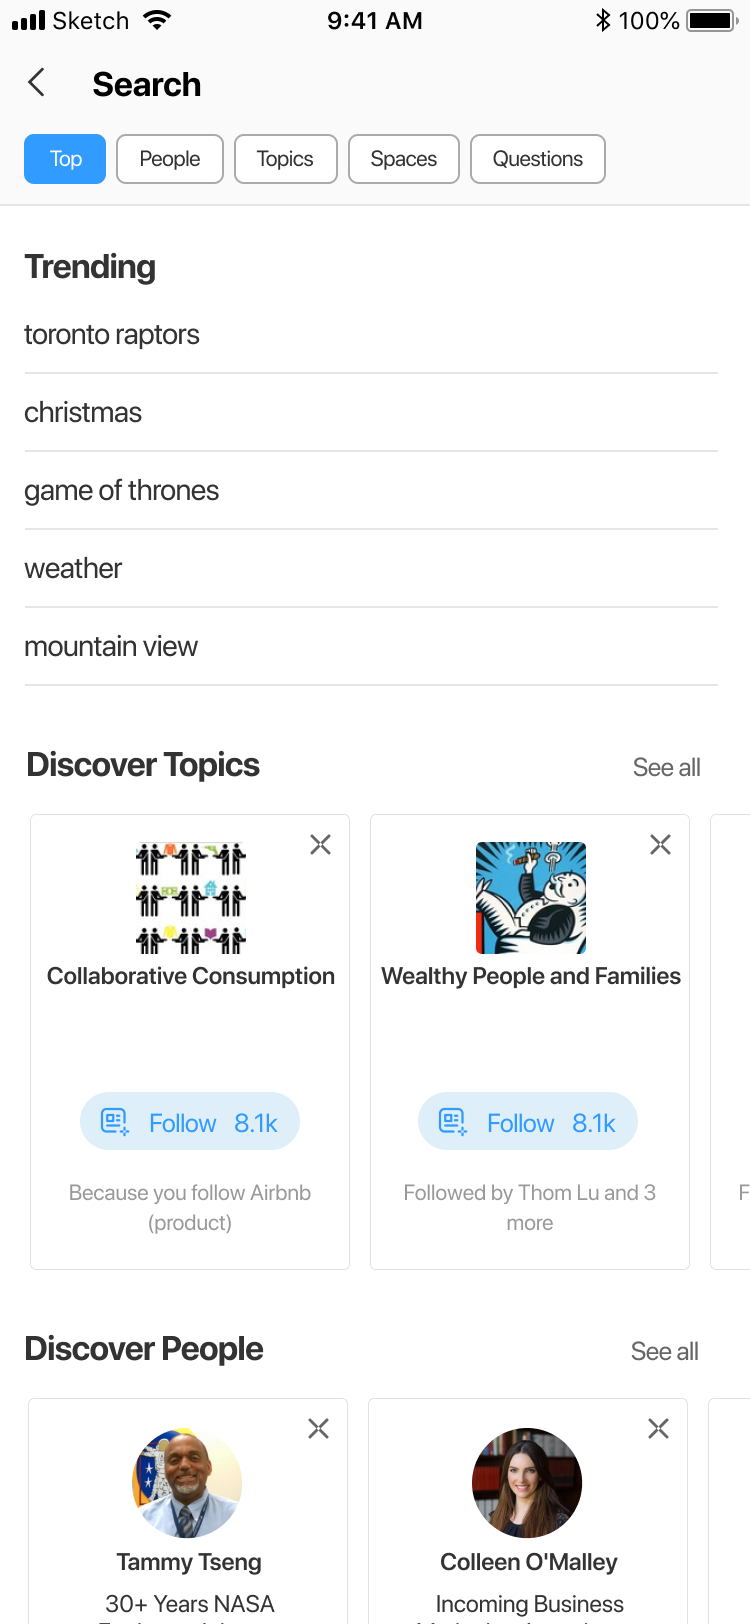 First mockup of new discover page